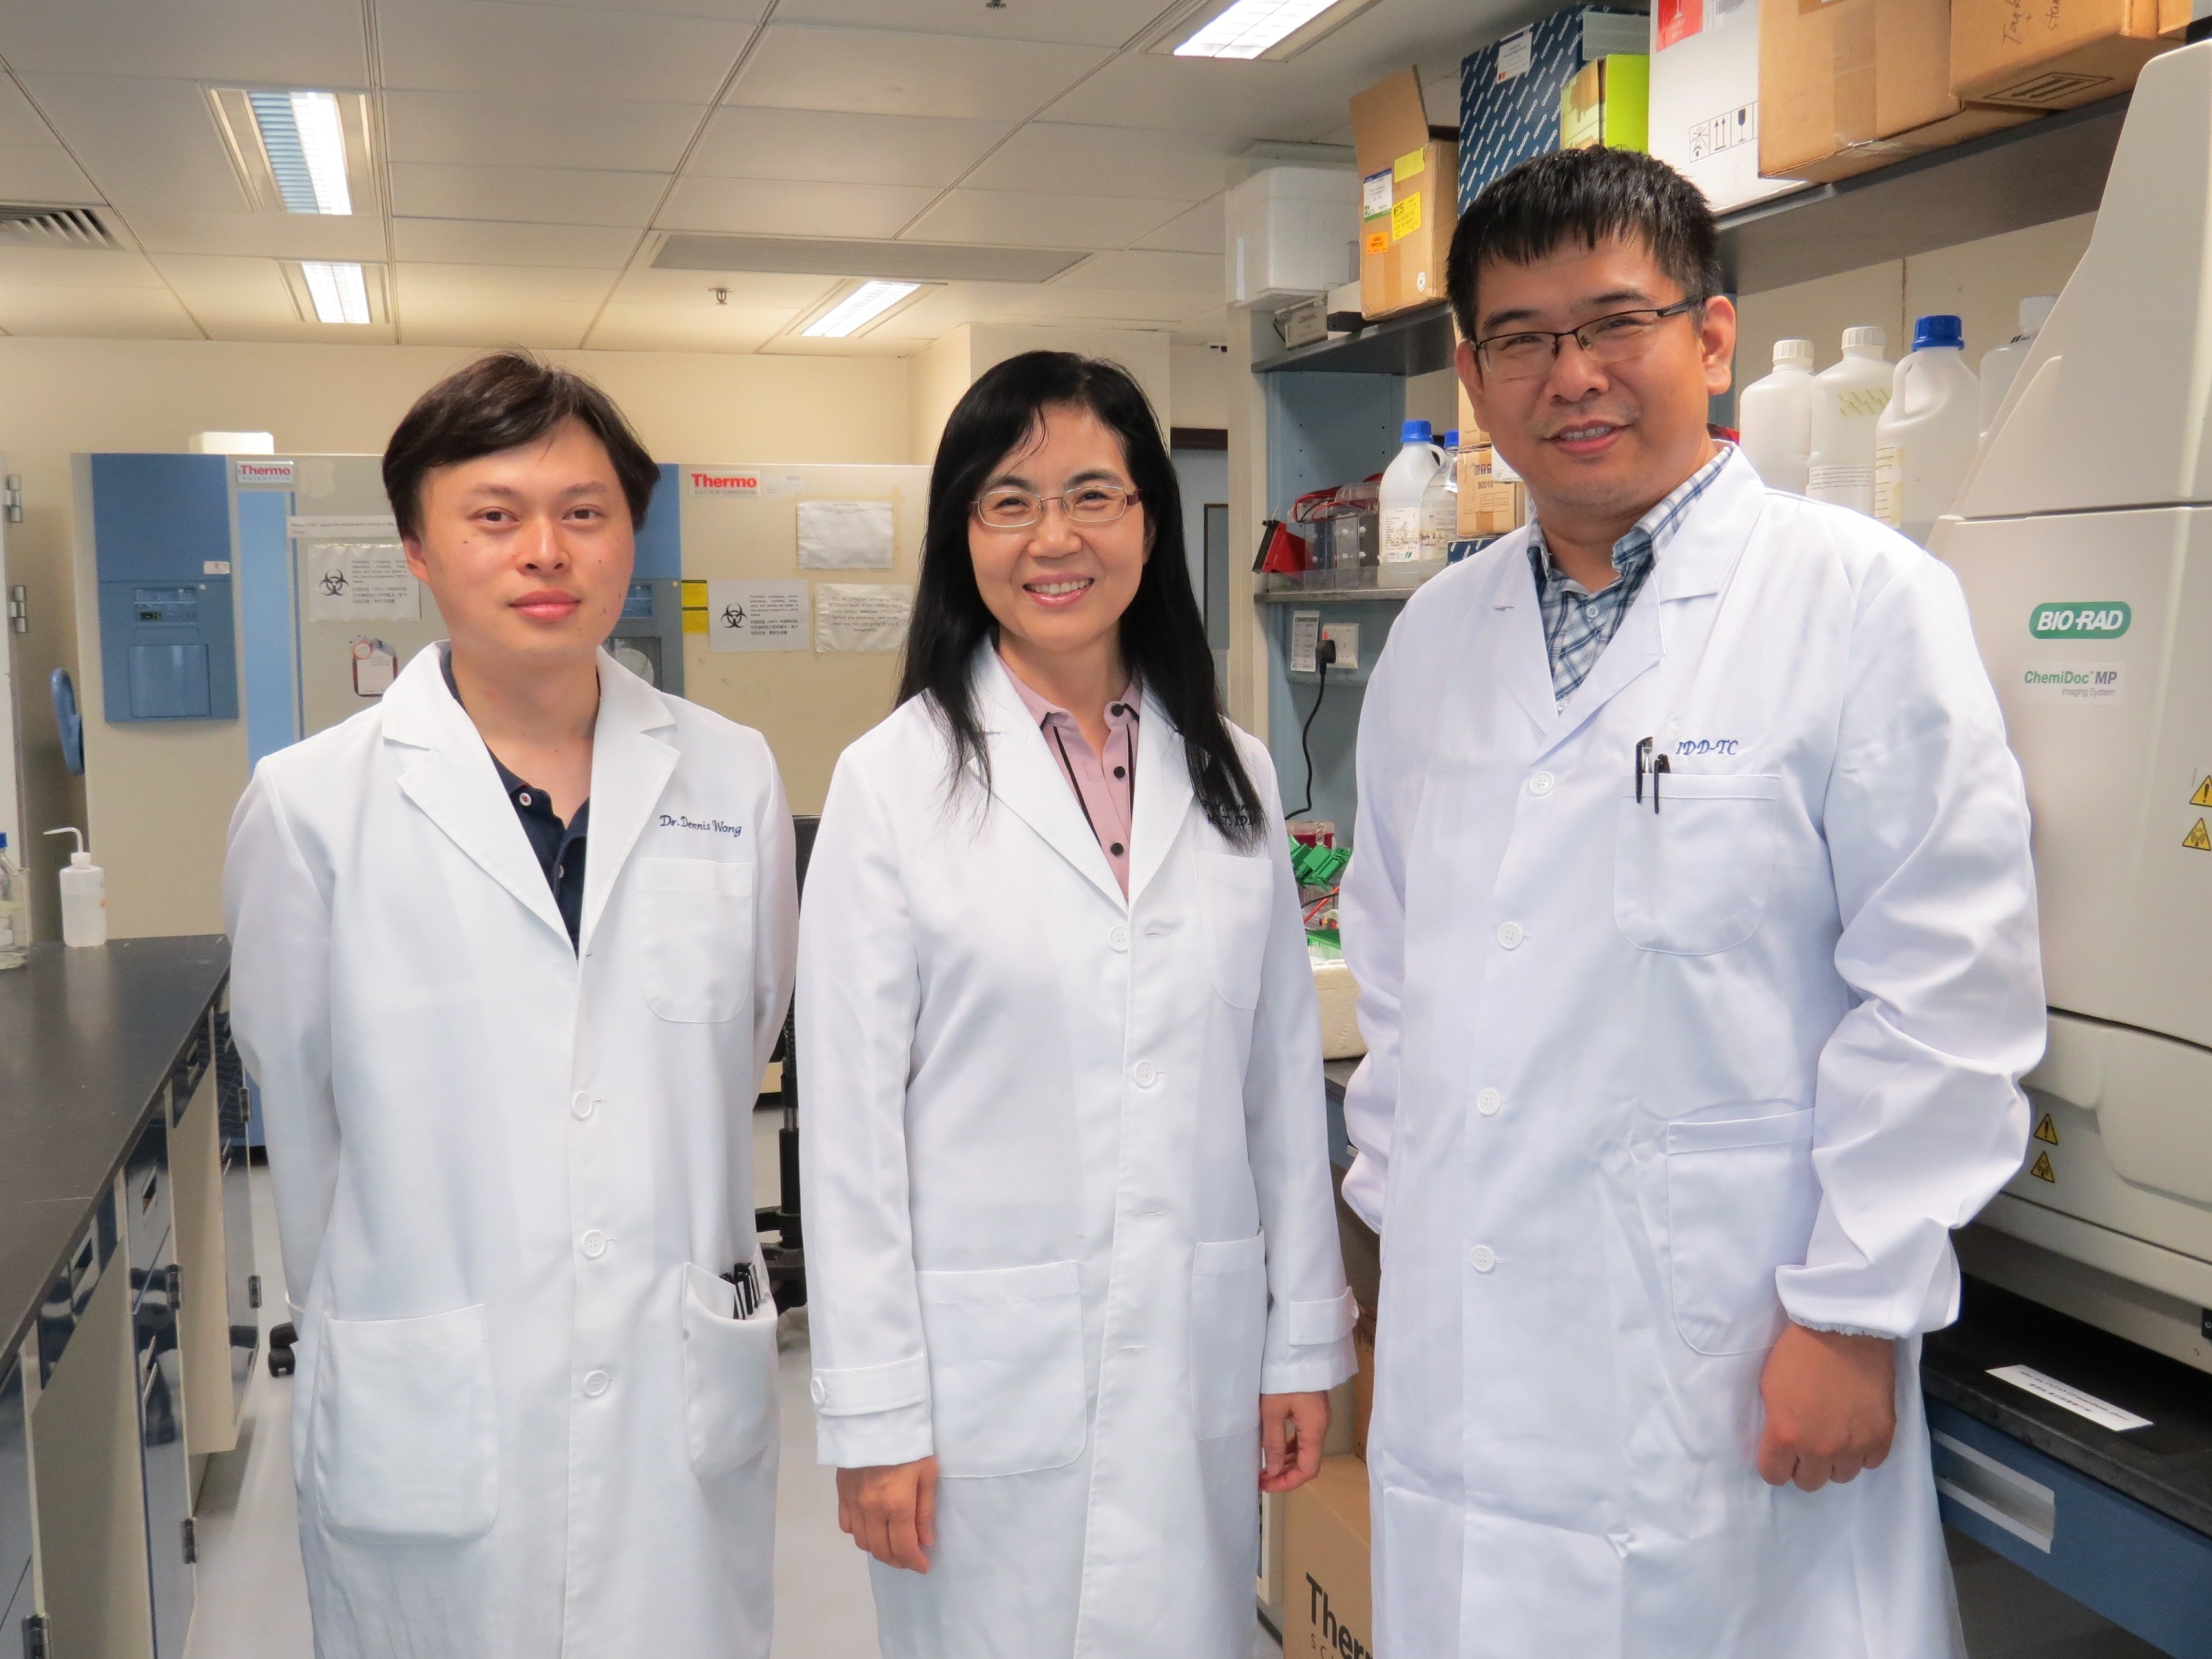 Professor Jun YU (centre), Department of Medicine and Therapeutics, Faculty of Medicine at CUHK, first discovered the role of SQLE as an oncogene in NAFLD-HCC. Team members of this study include Dr. Dabin LIU (right) and Dr. Chi Chun WONG